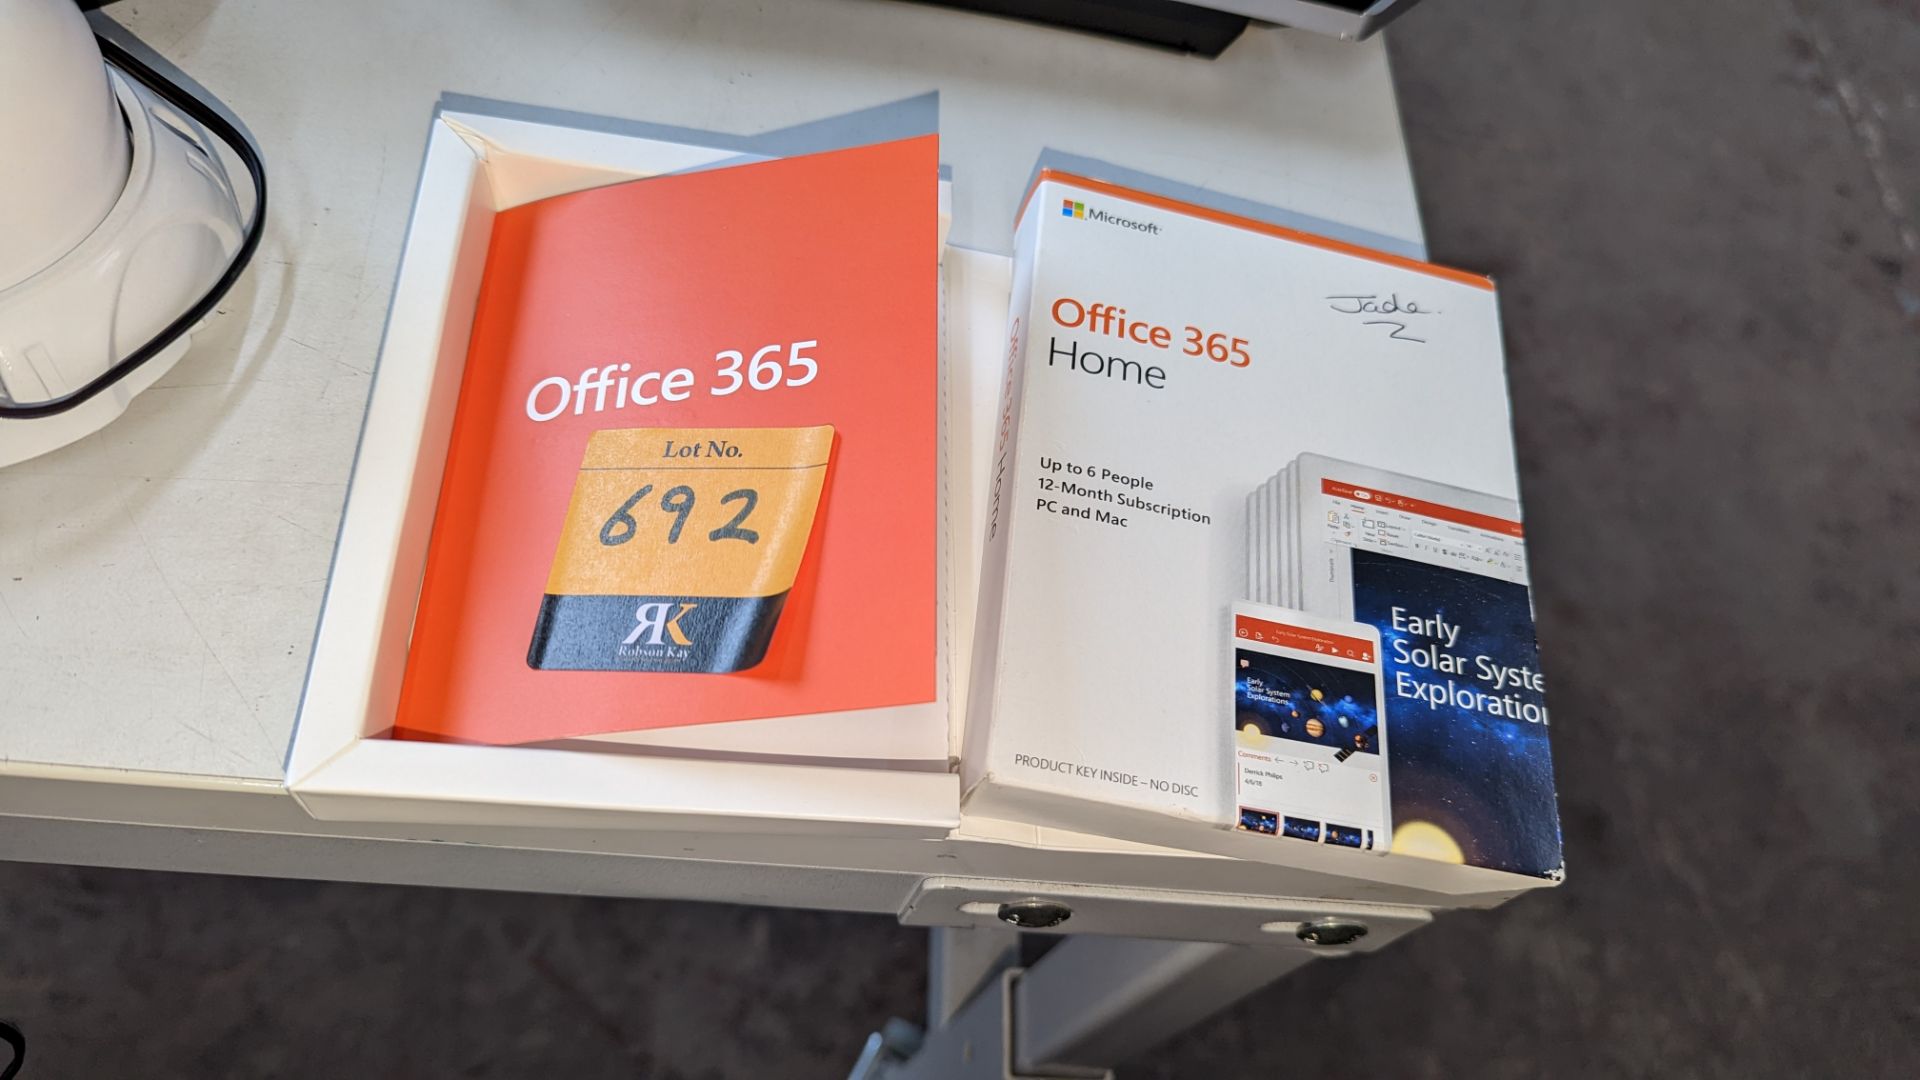 Microsoft Office 365 software pack - Image 5 of 5